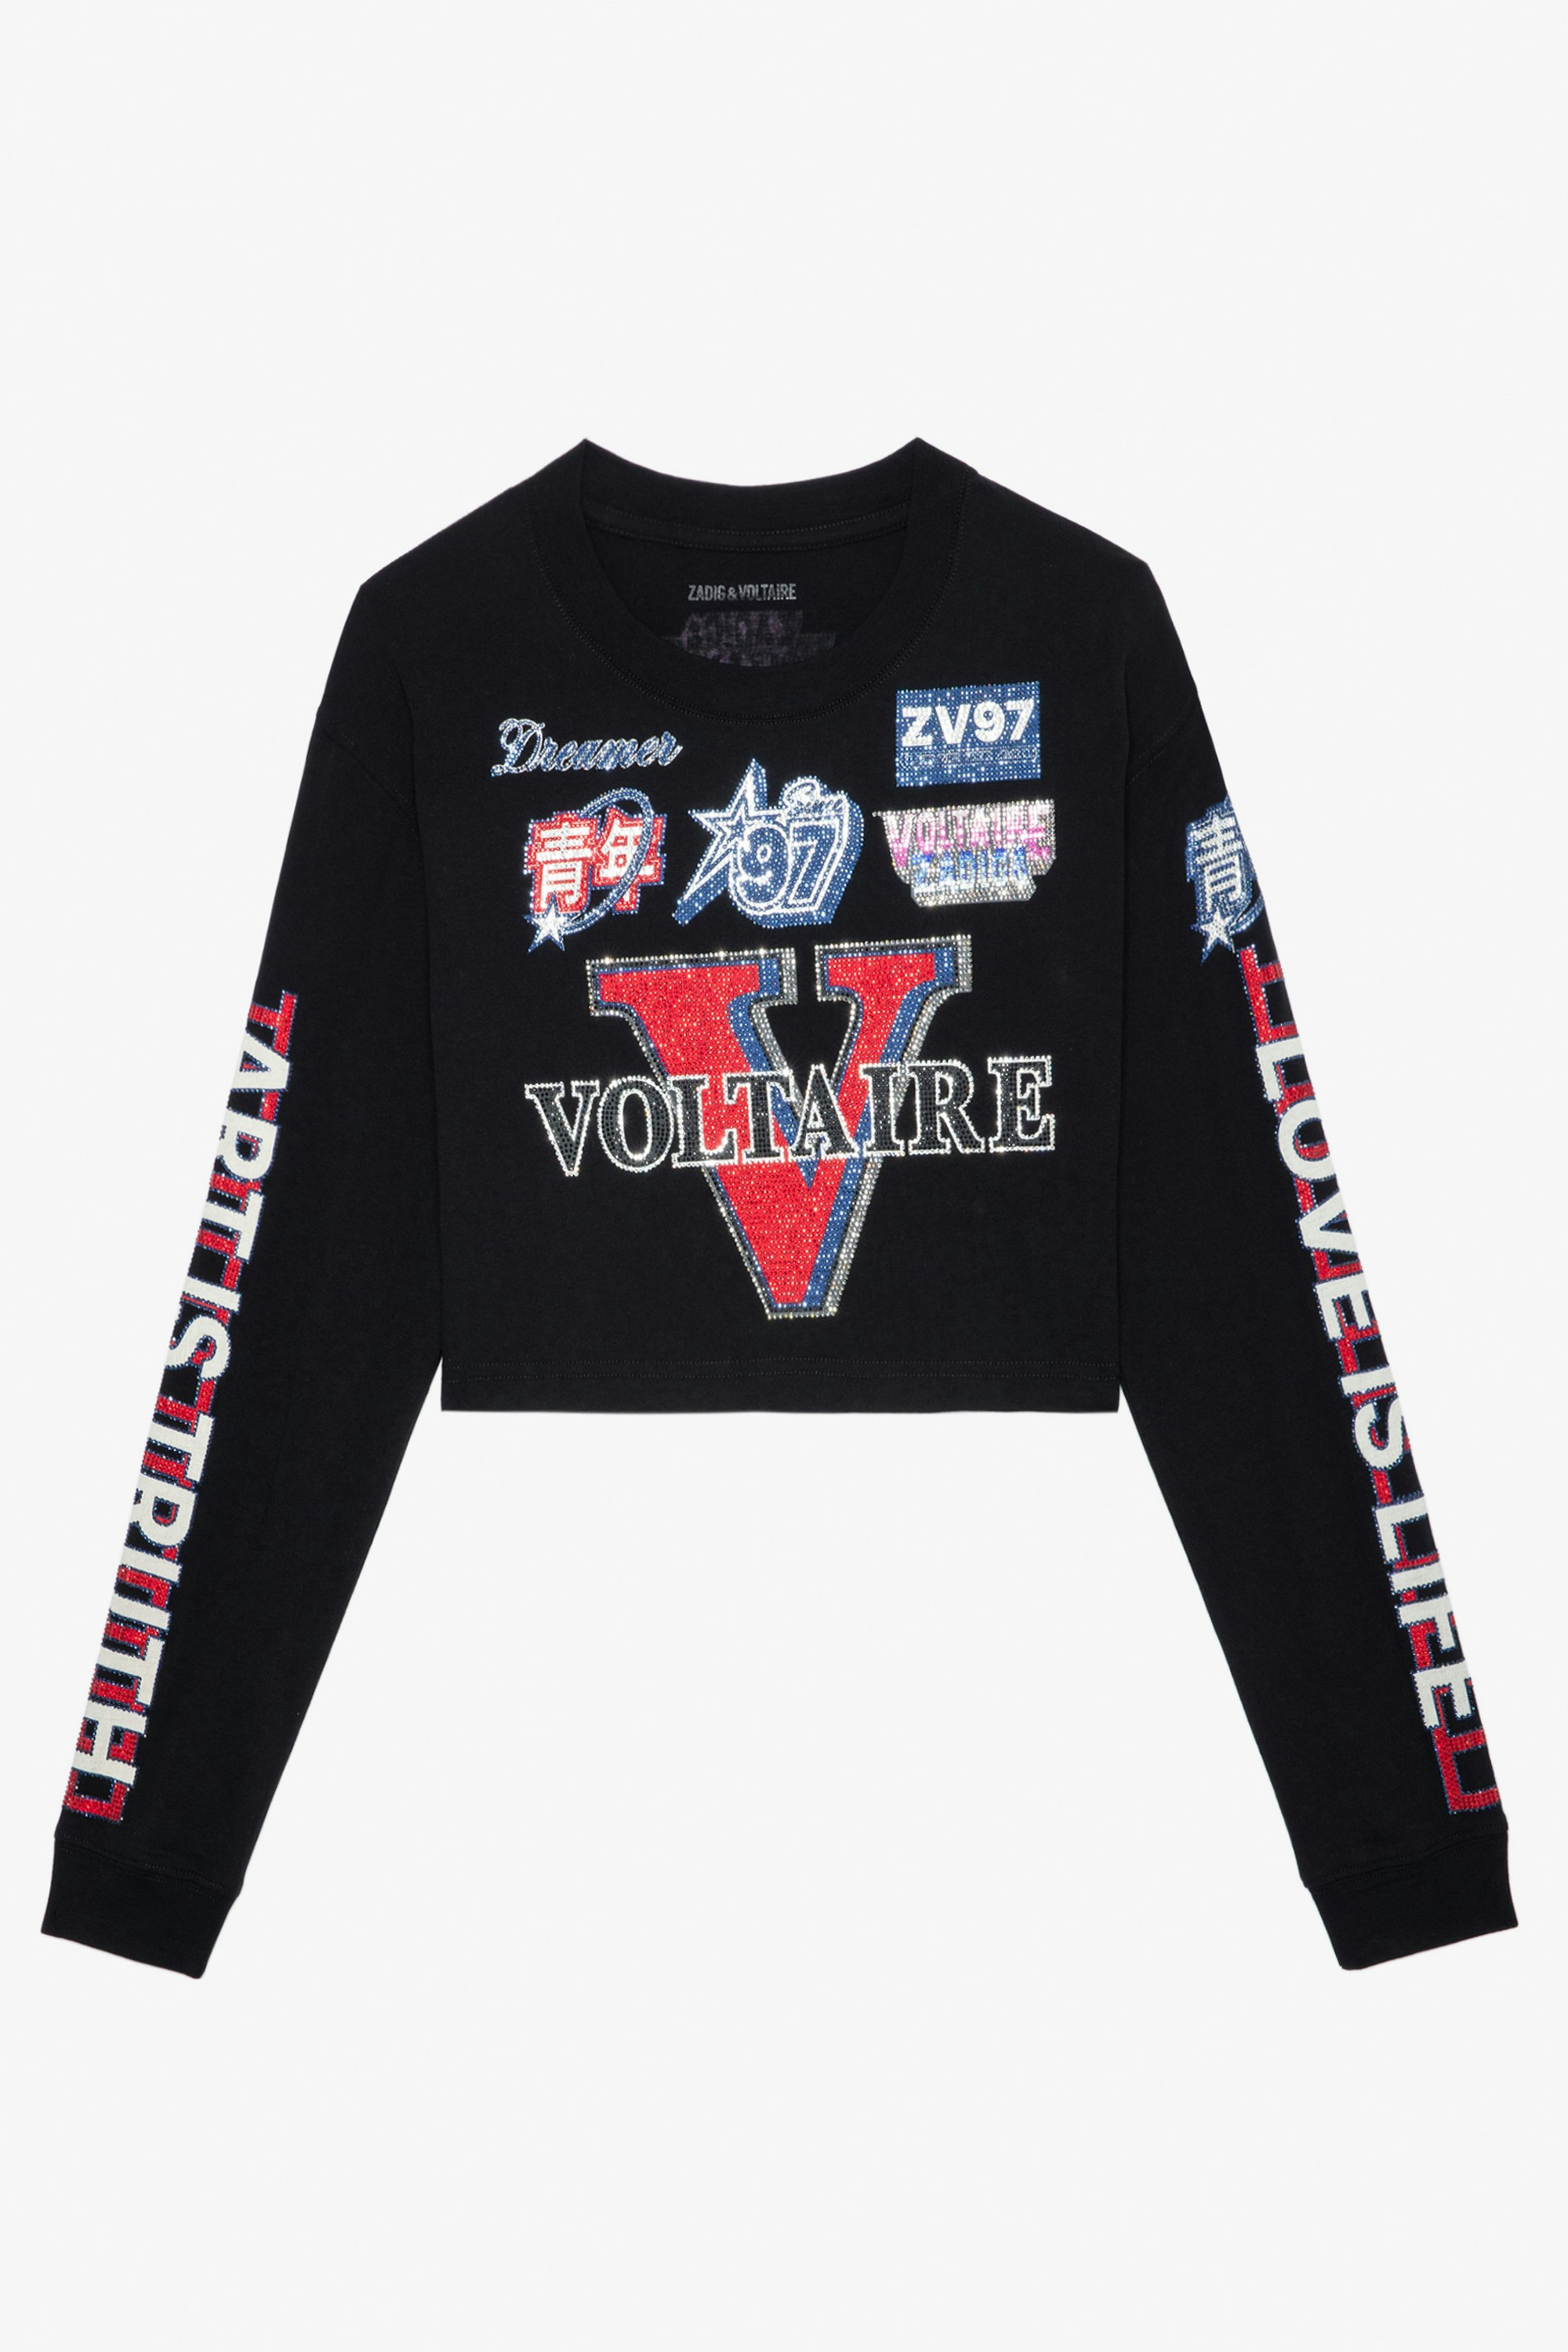 Iona Voltaire T-shirt - Women’s black cotton biker-style cropped T-shirt with long sleeves and diamanté Voltaire badge motifs.